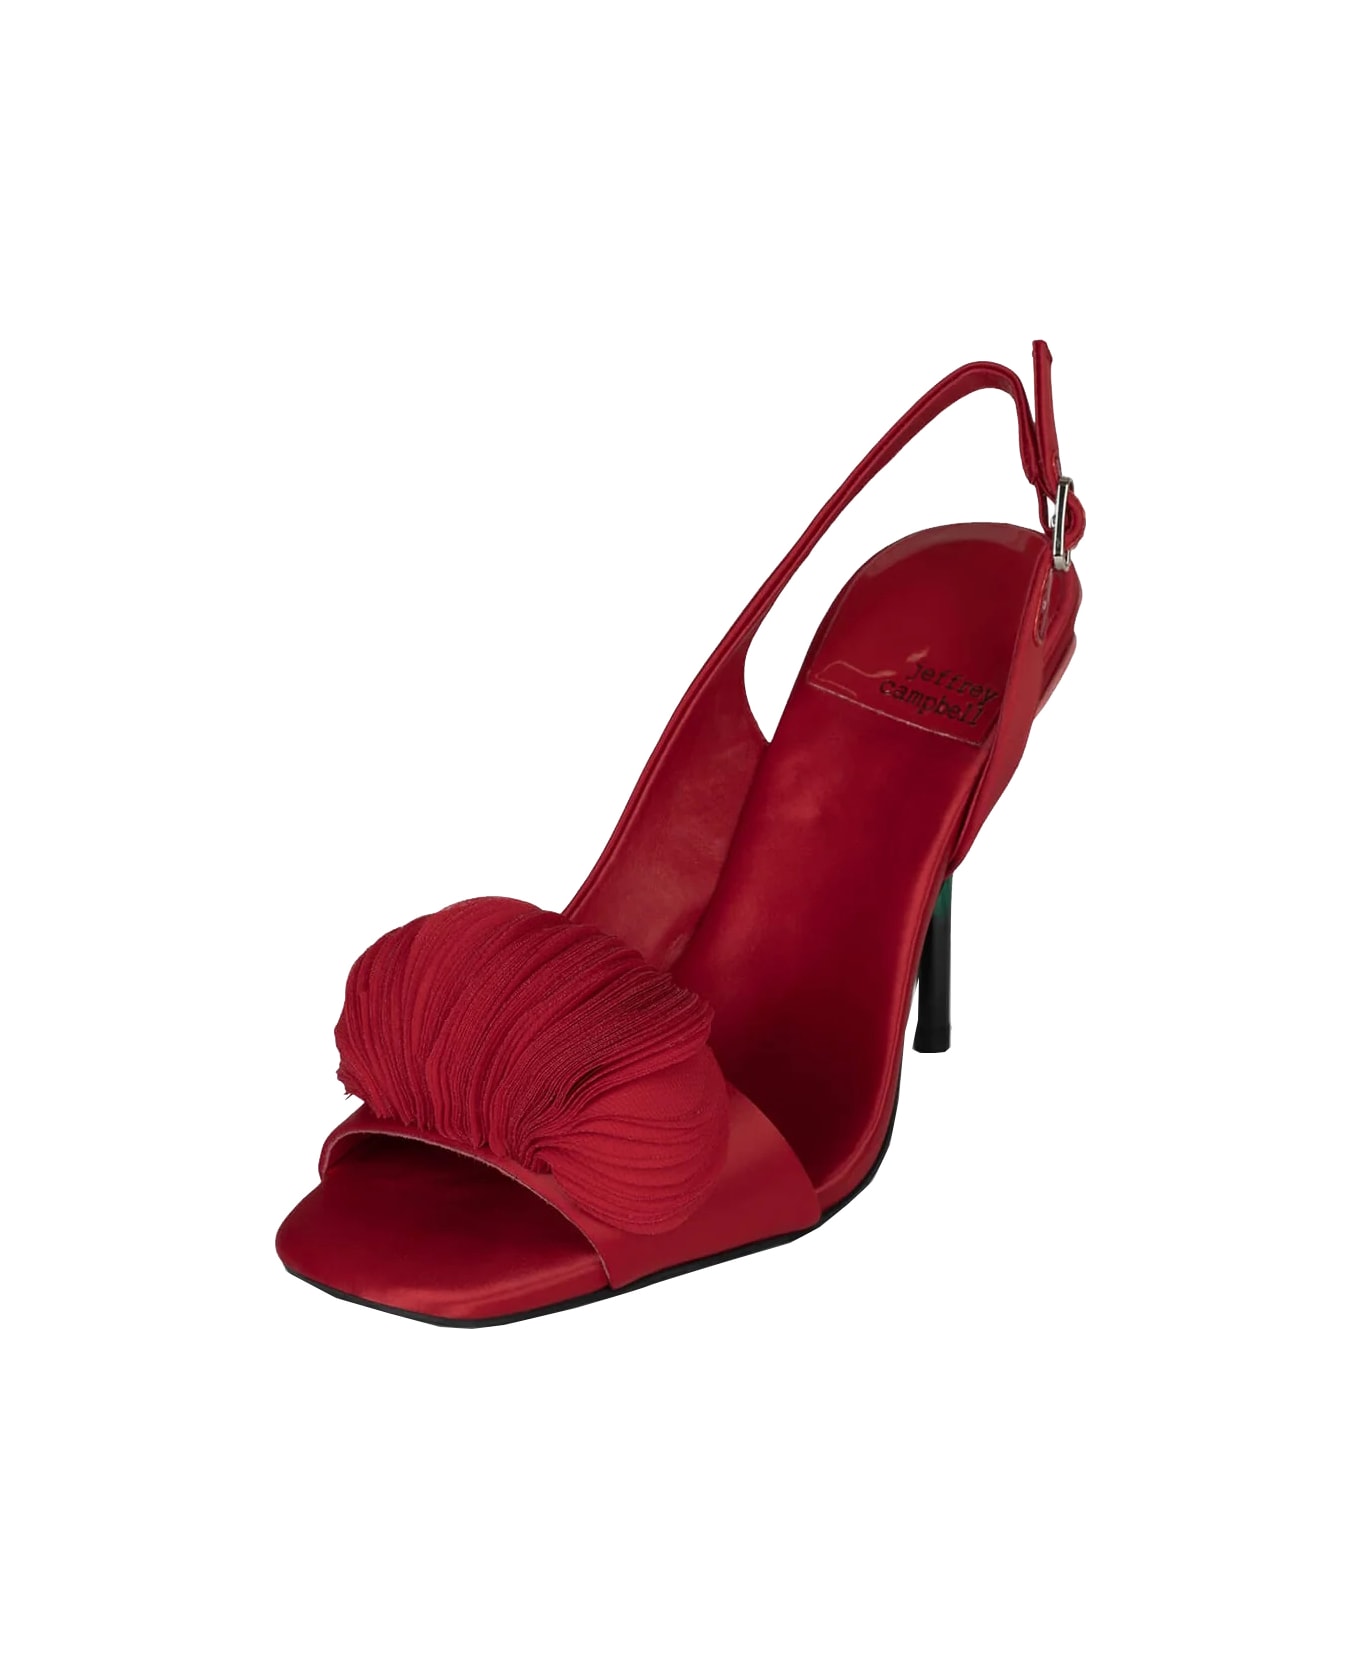 Jeffrey Campbell Shoes With Heels - Red